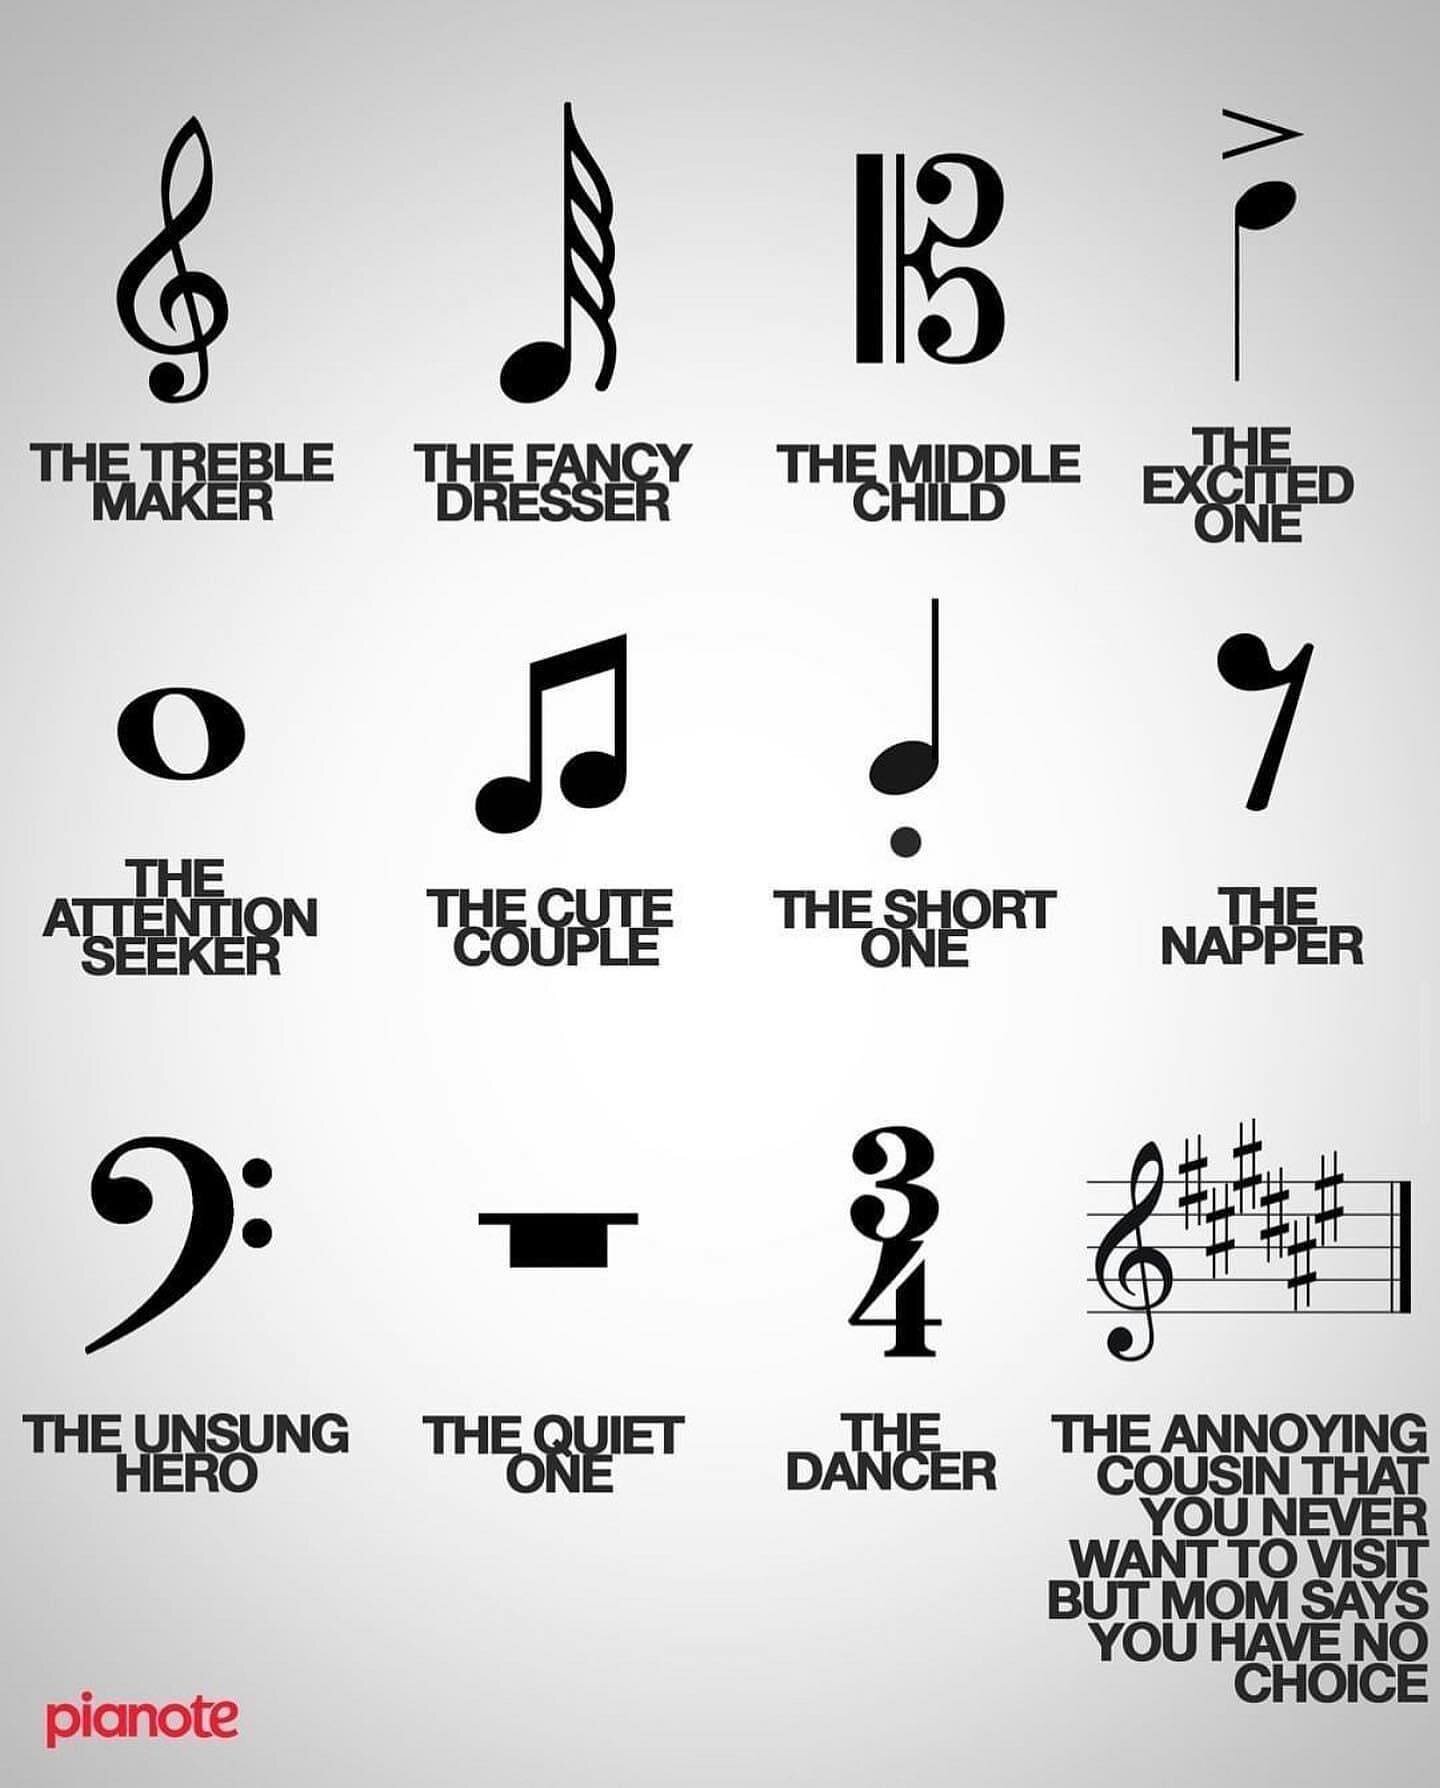 A little humor to end your weekend!😂 We hope you had a great weekend and are ready for a music-filled week. #music #weekend #notes #musictheory